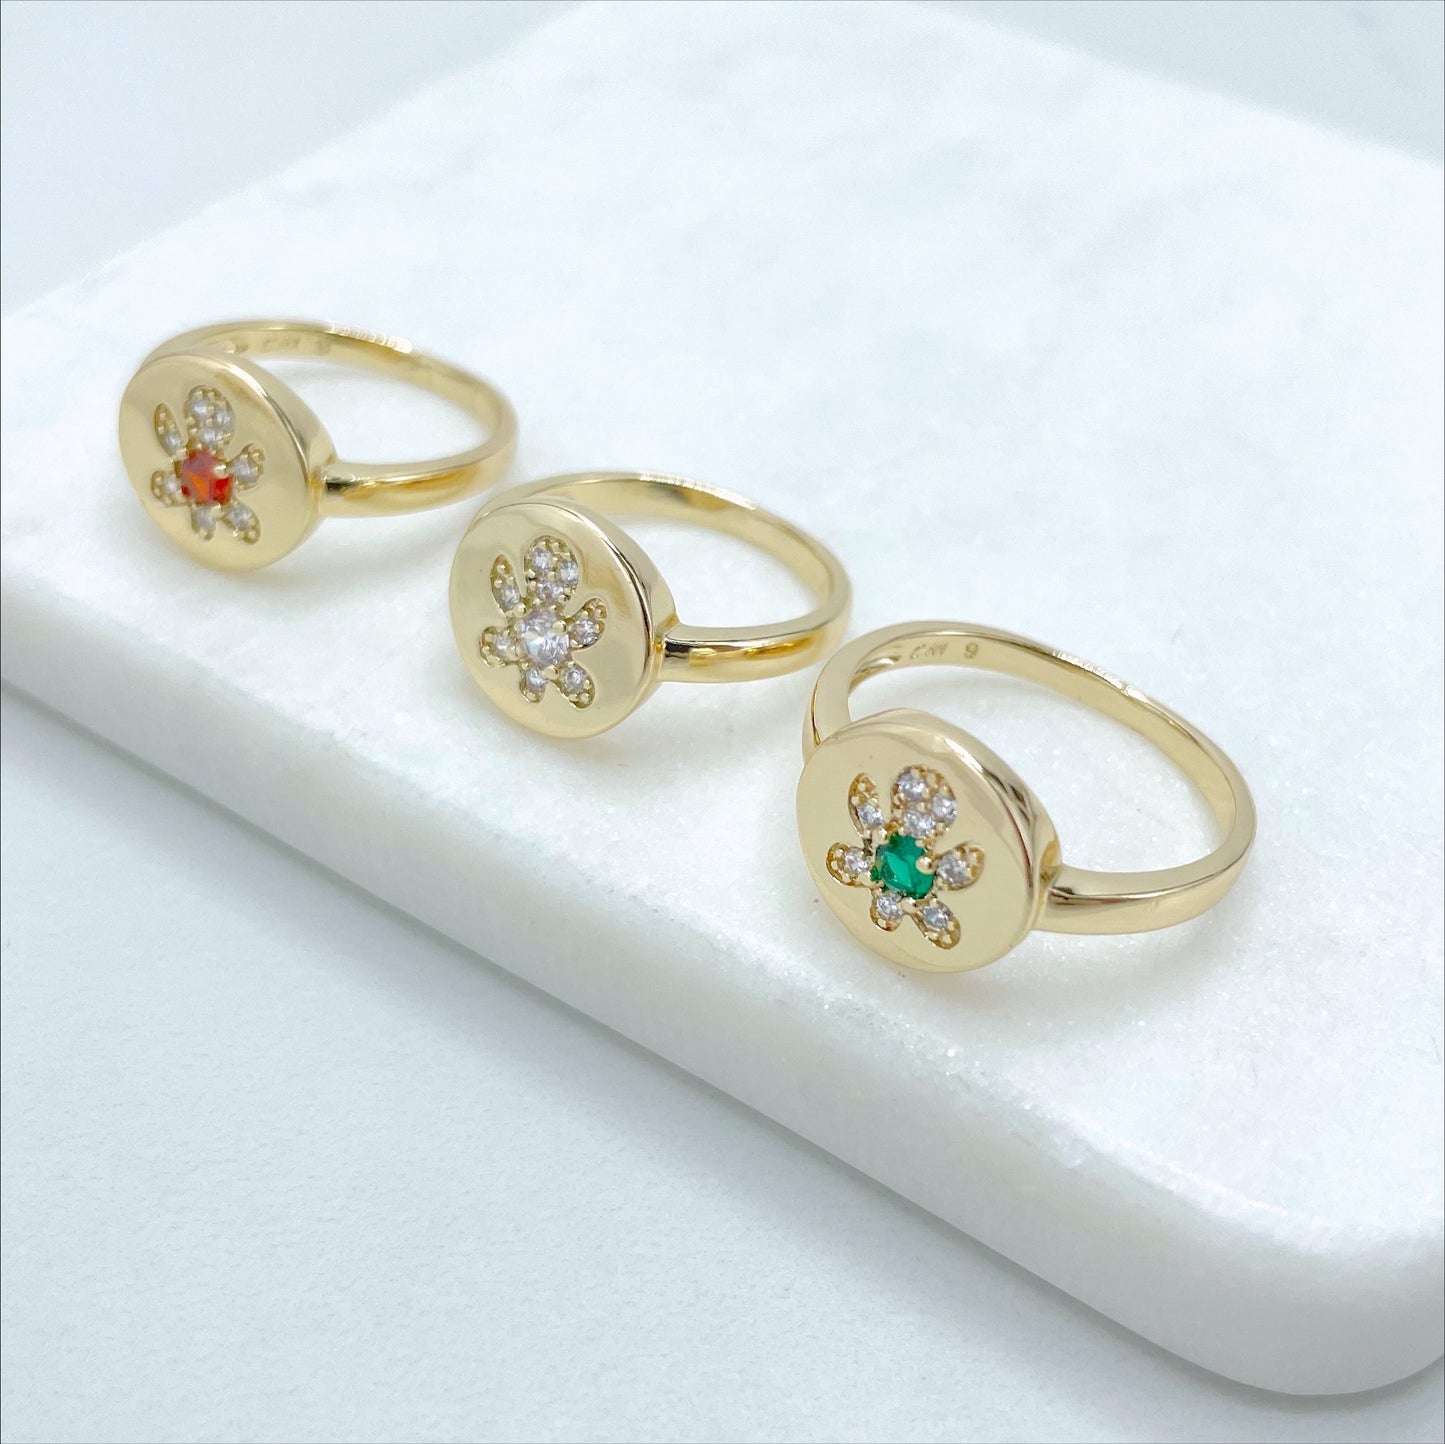 18k Gold Filled Clear Micro Cubic Zirconia in Flower Shape Design Ring with Green, Orange or Clear CZ, Wholesale Jewelry Making Supplies